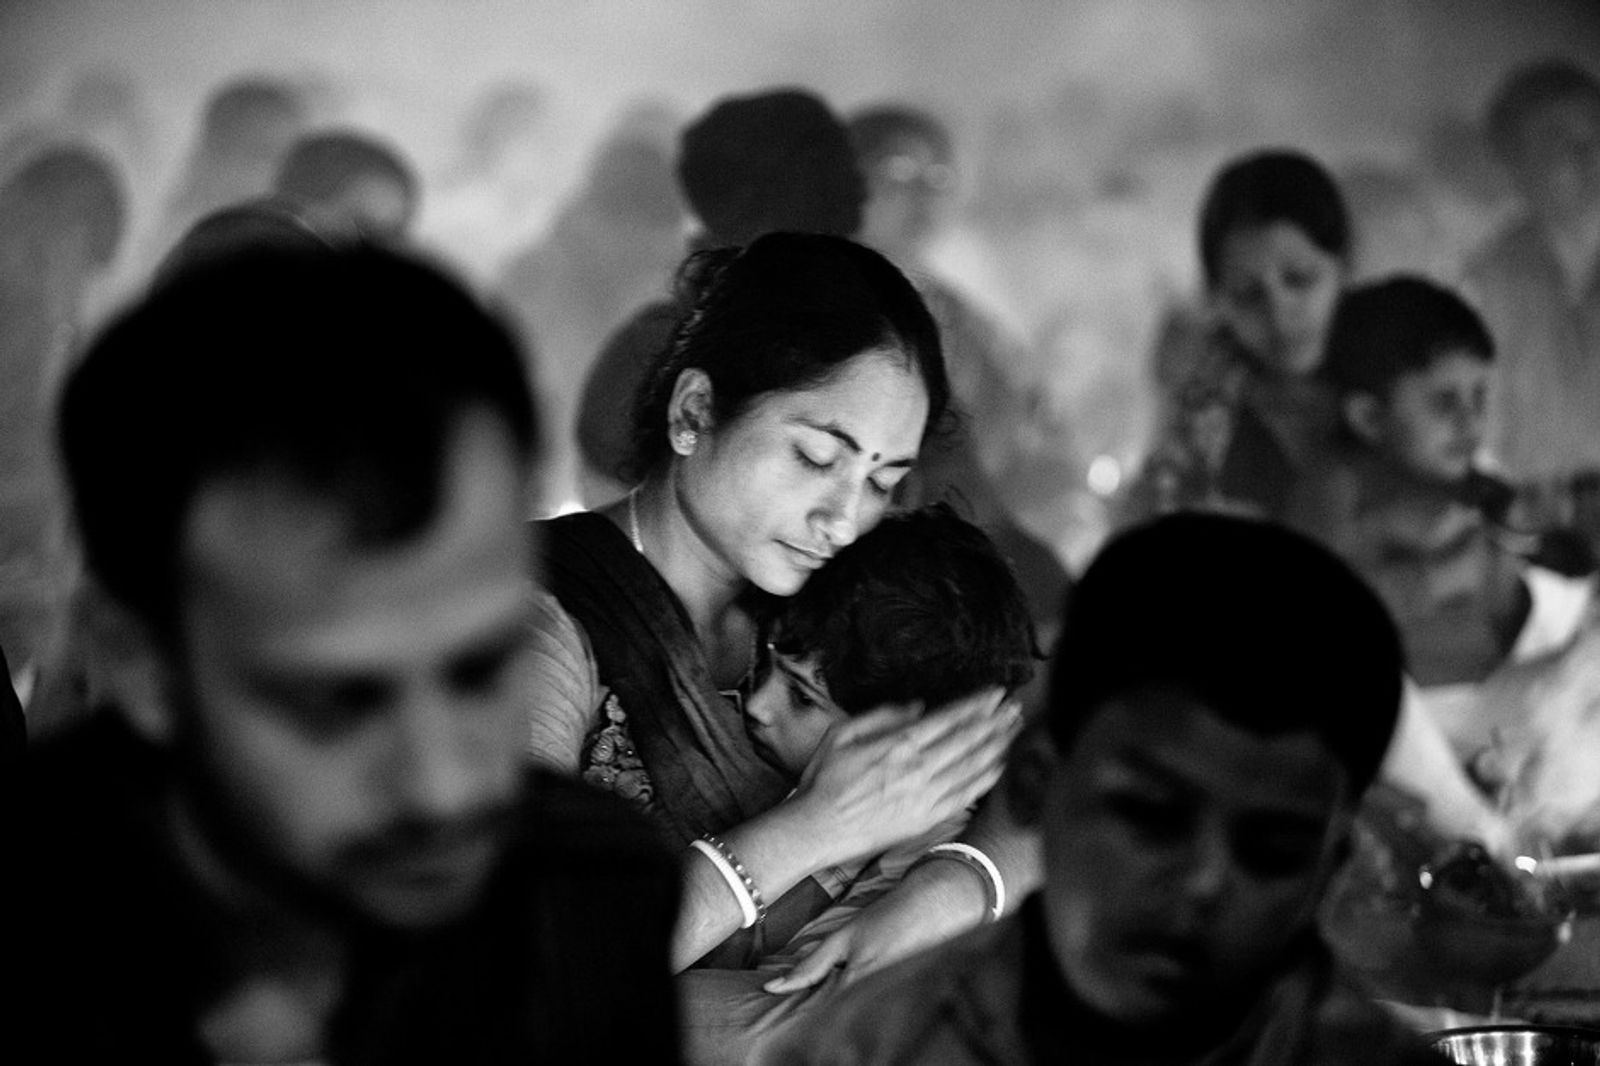 © Suvra Kanti Das - Image from the Rakher Upobash photography project